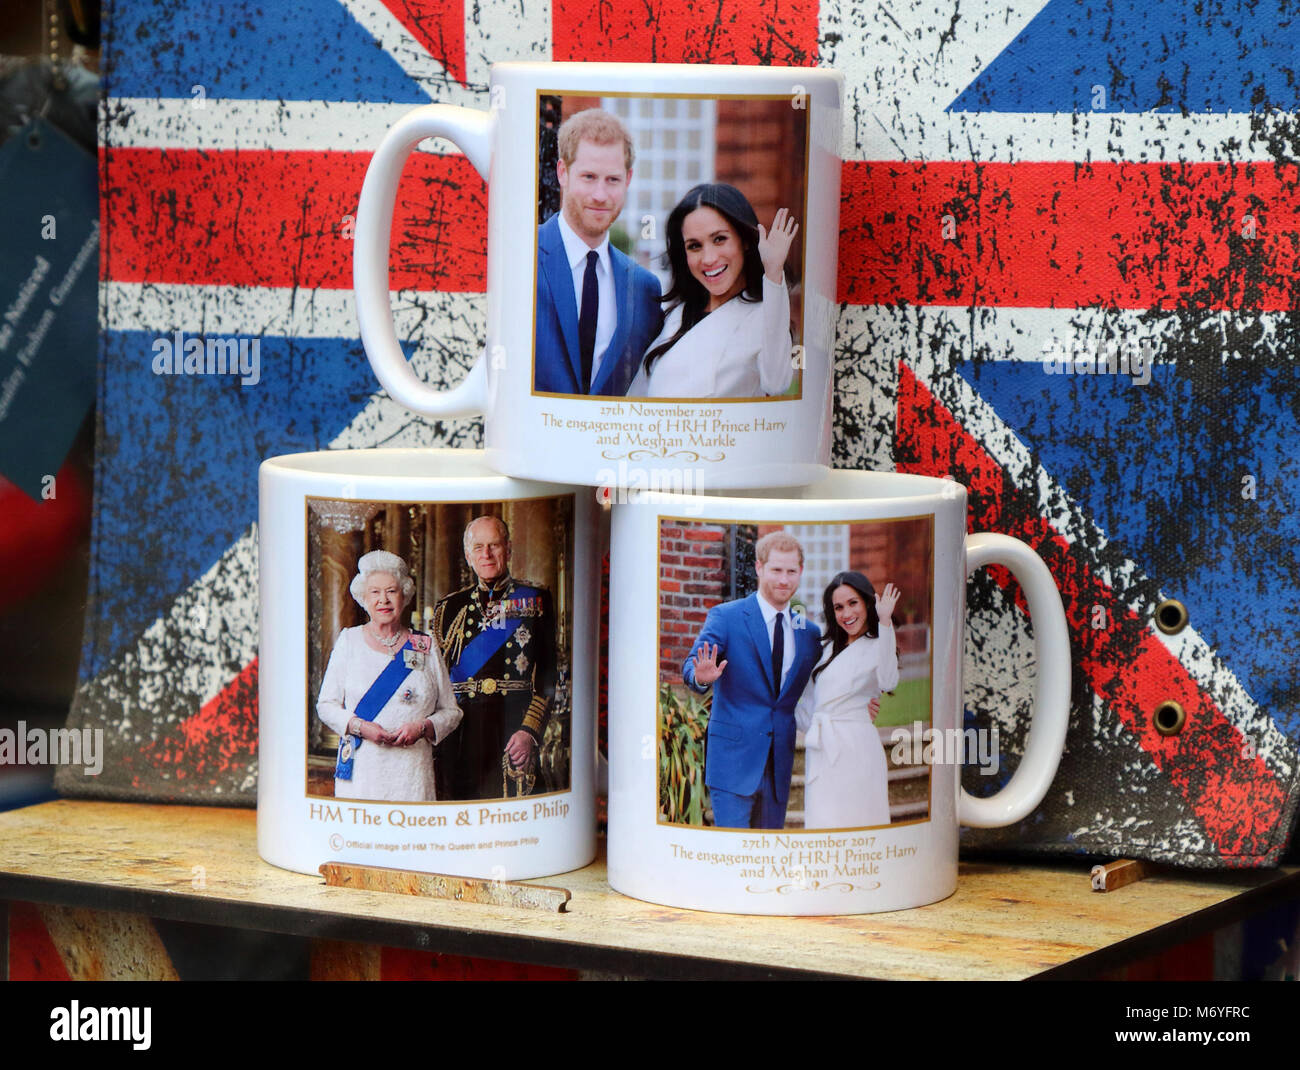 Royal Wedding Preparations in Windsor. Security measures. GVs and Souvenirs on sale in the town. Rough Sleepers  Featuring: Royal wedding souvenirs Where: London, United Kingdom When: 03 Feb 2018 Credit: WENN.com Stock Photo